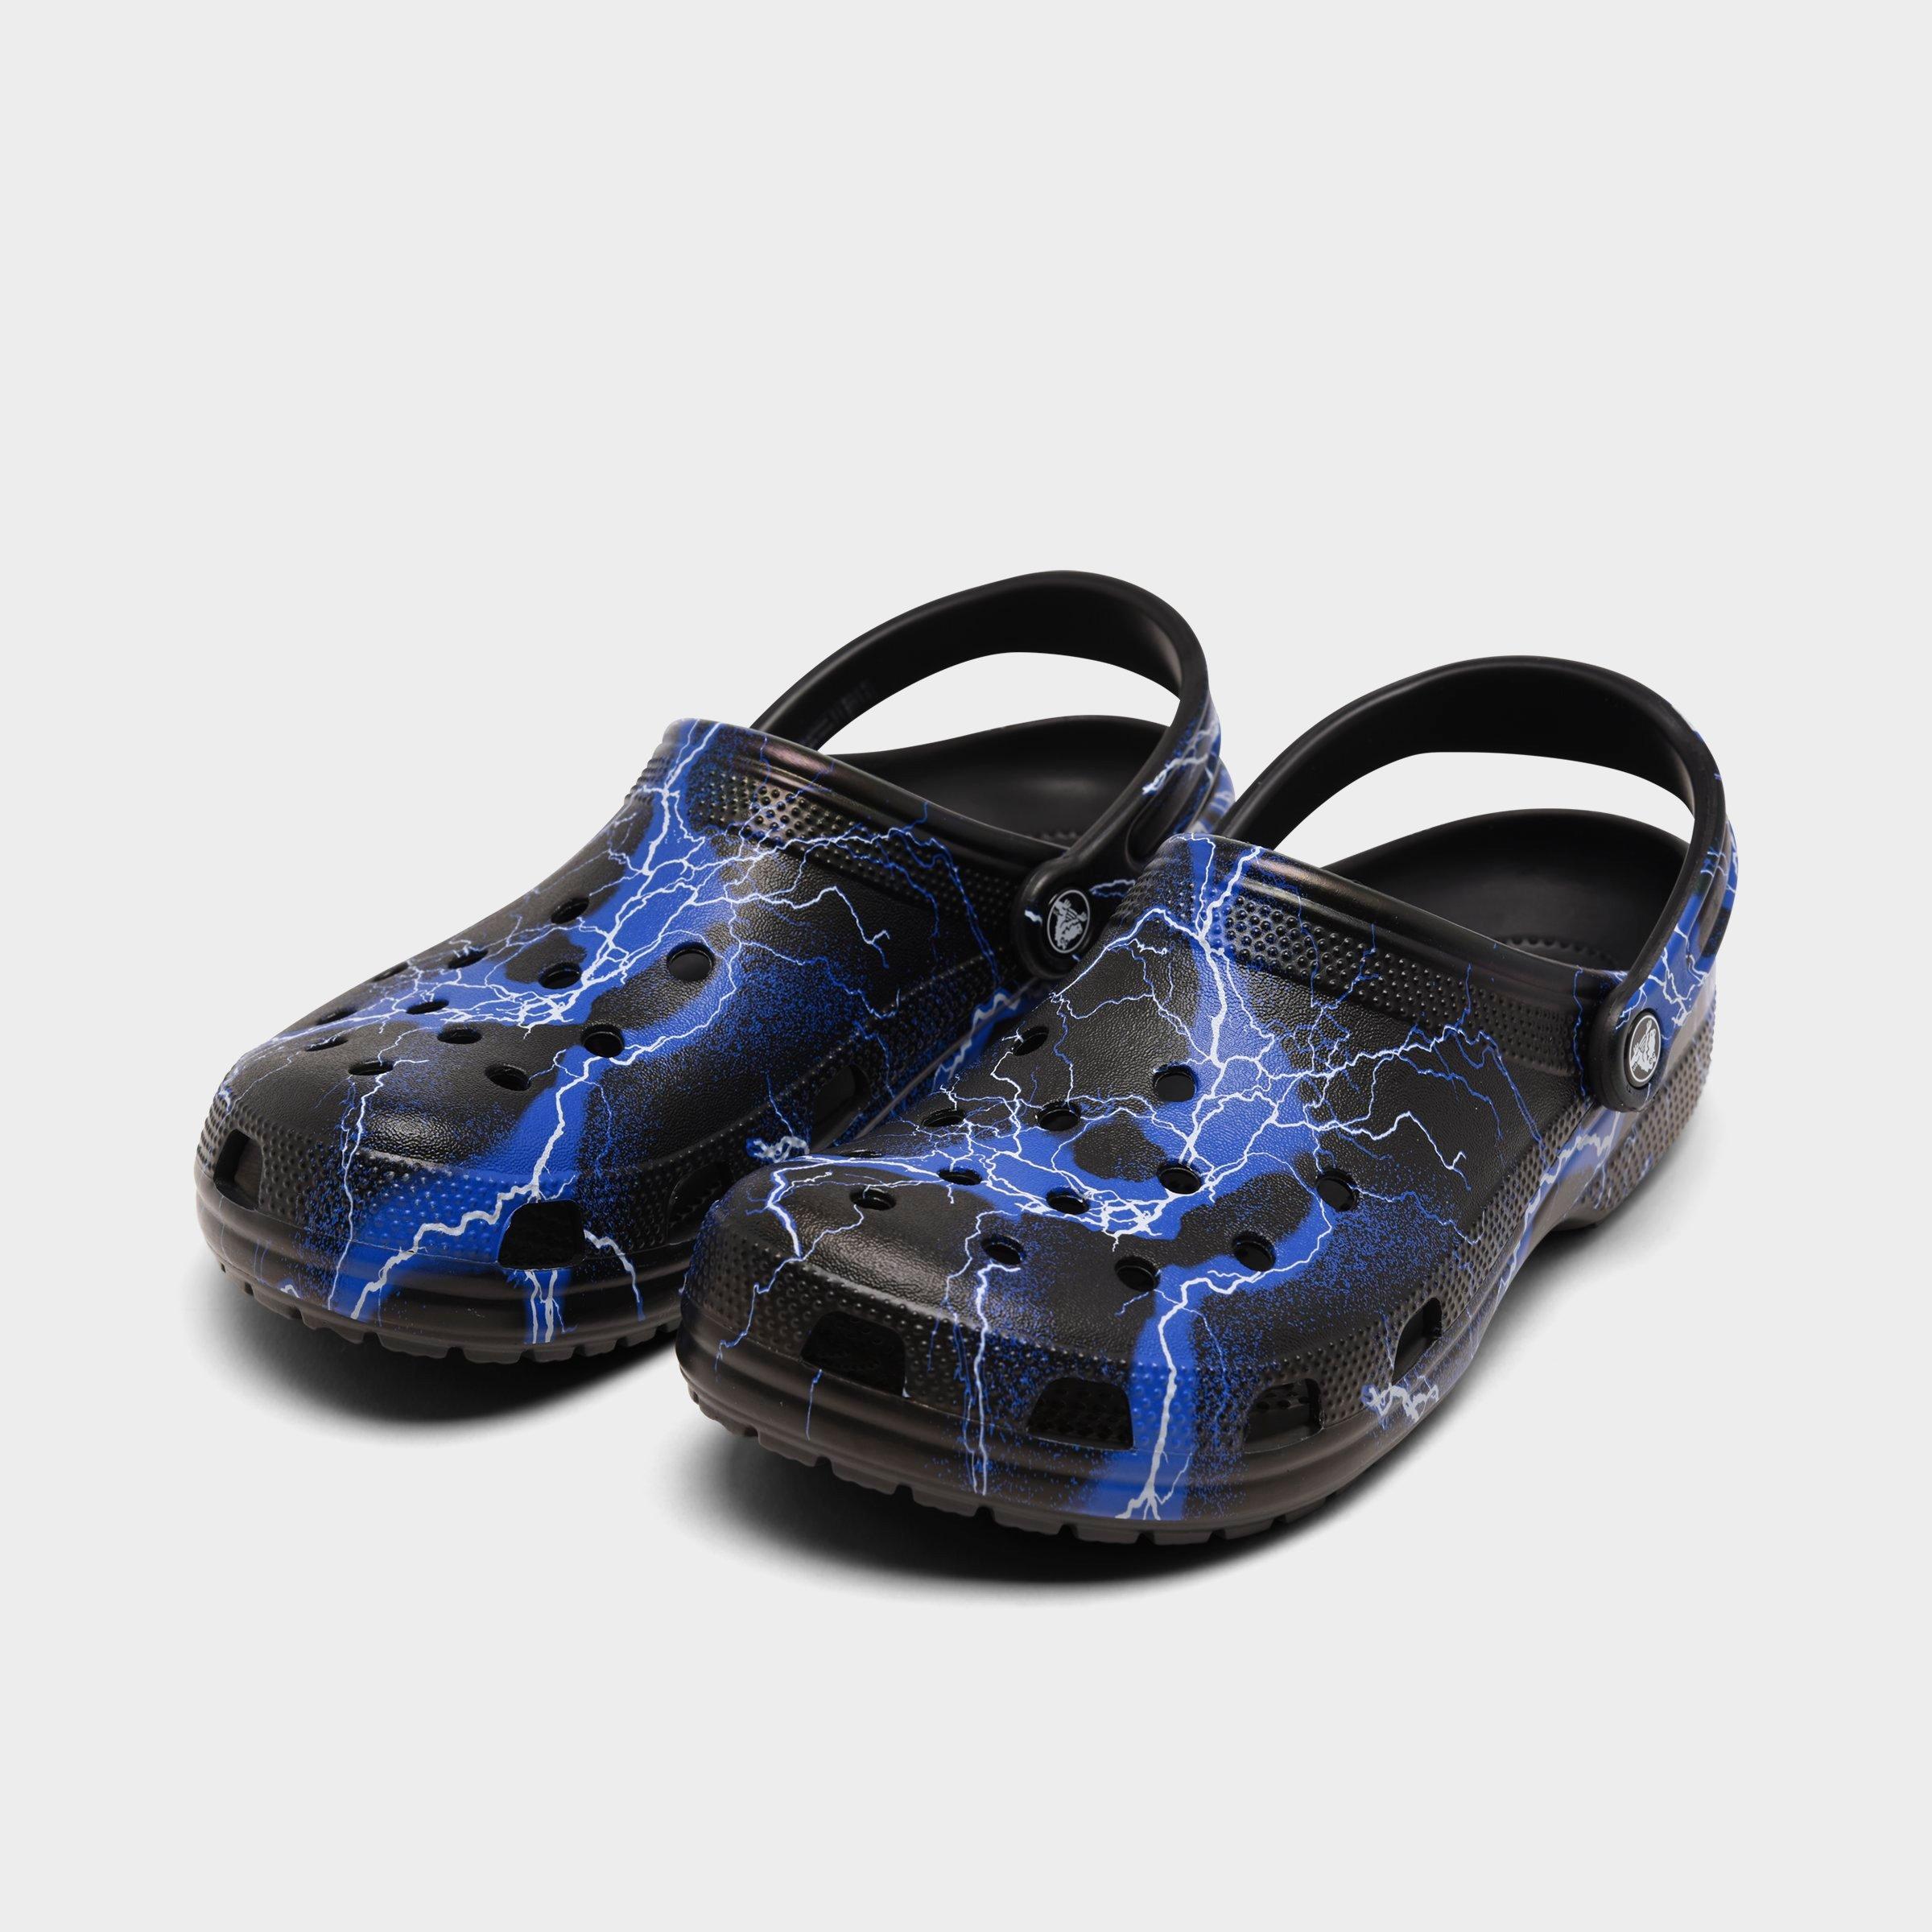 out of this world crocs